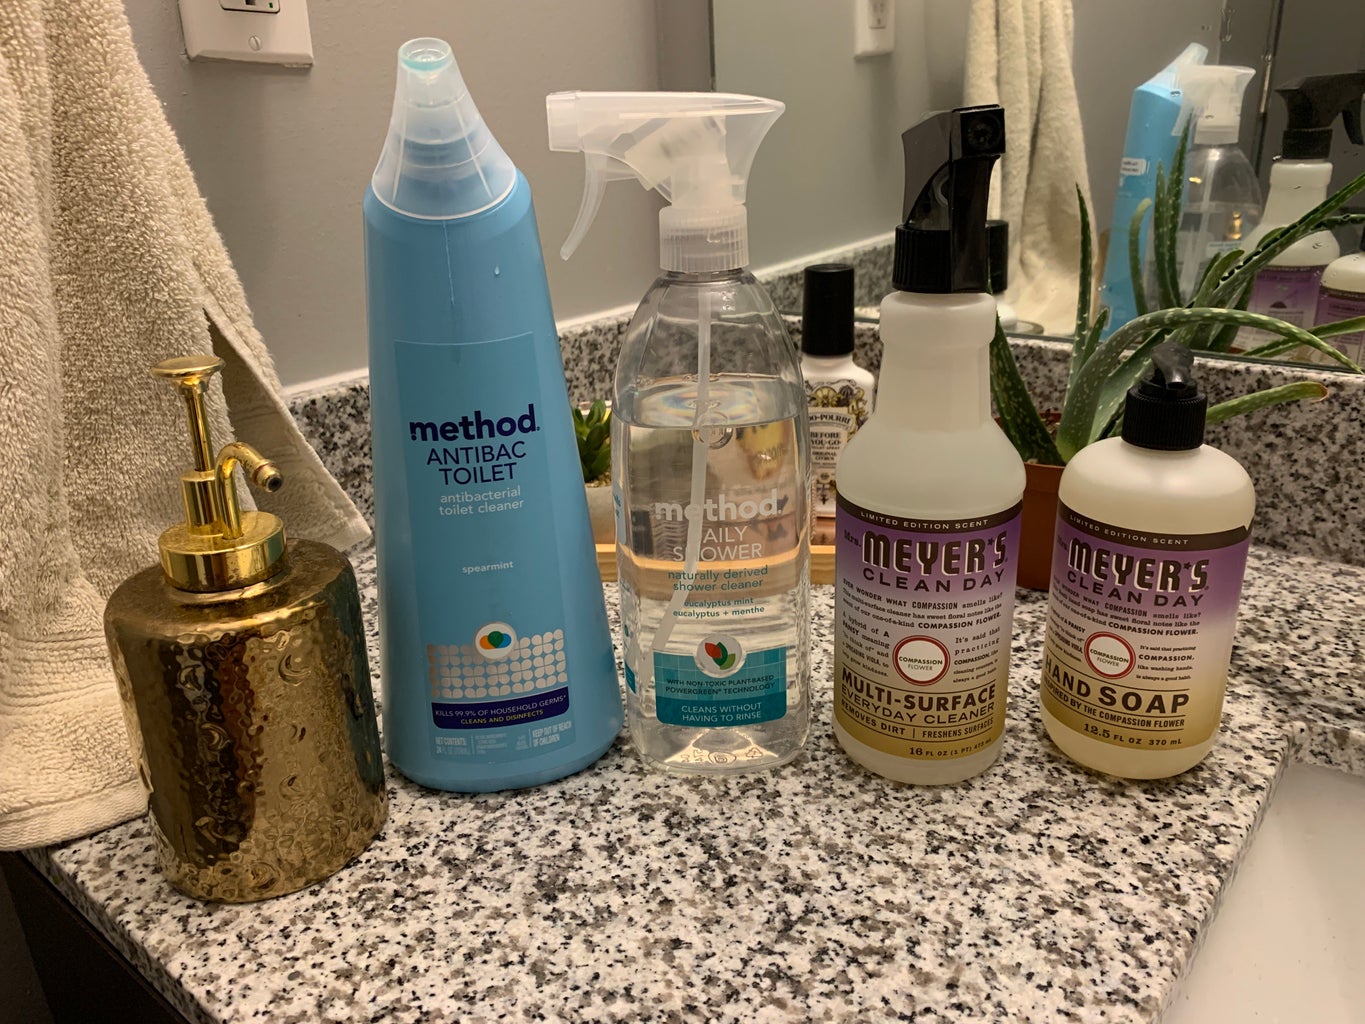 variety of cleaning products on bathroom sink